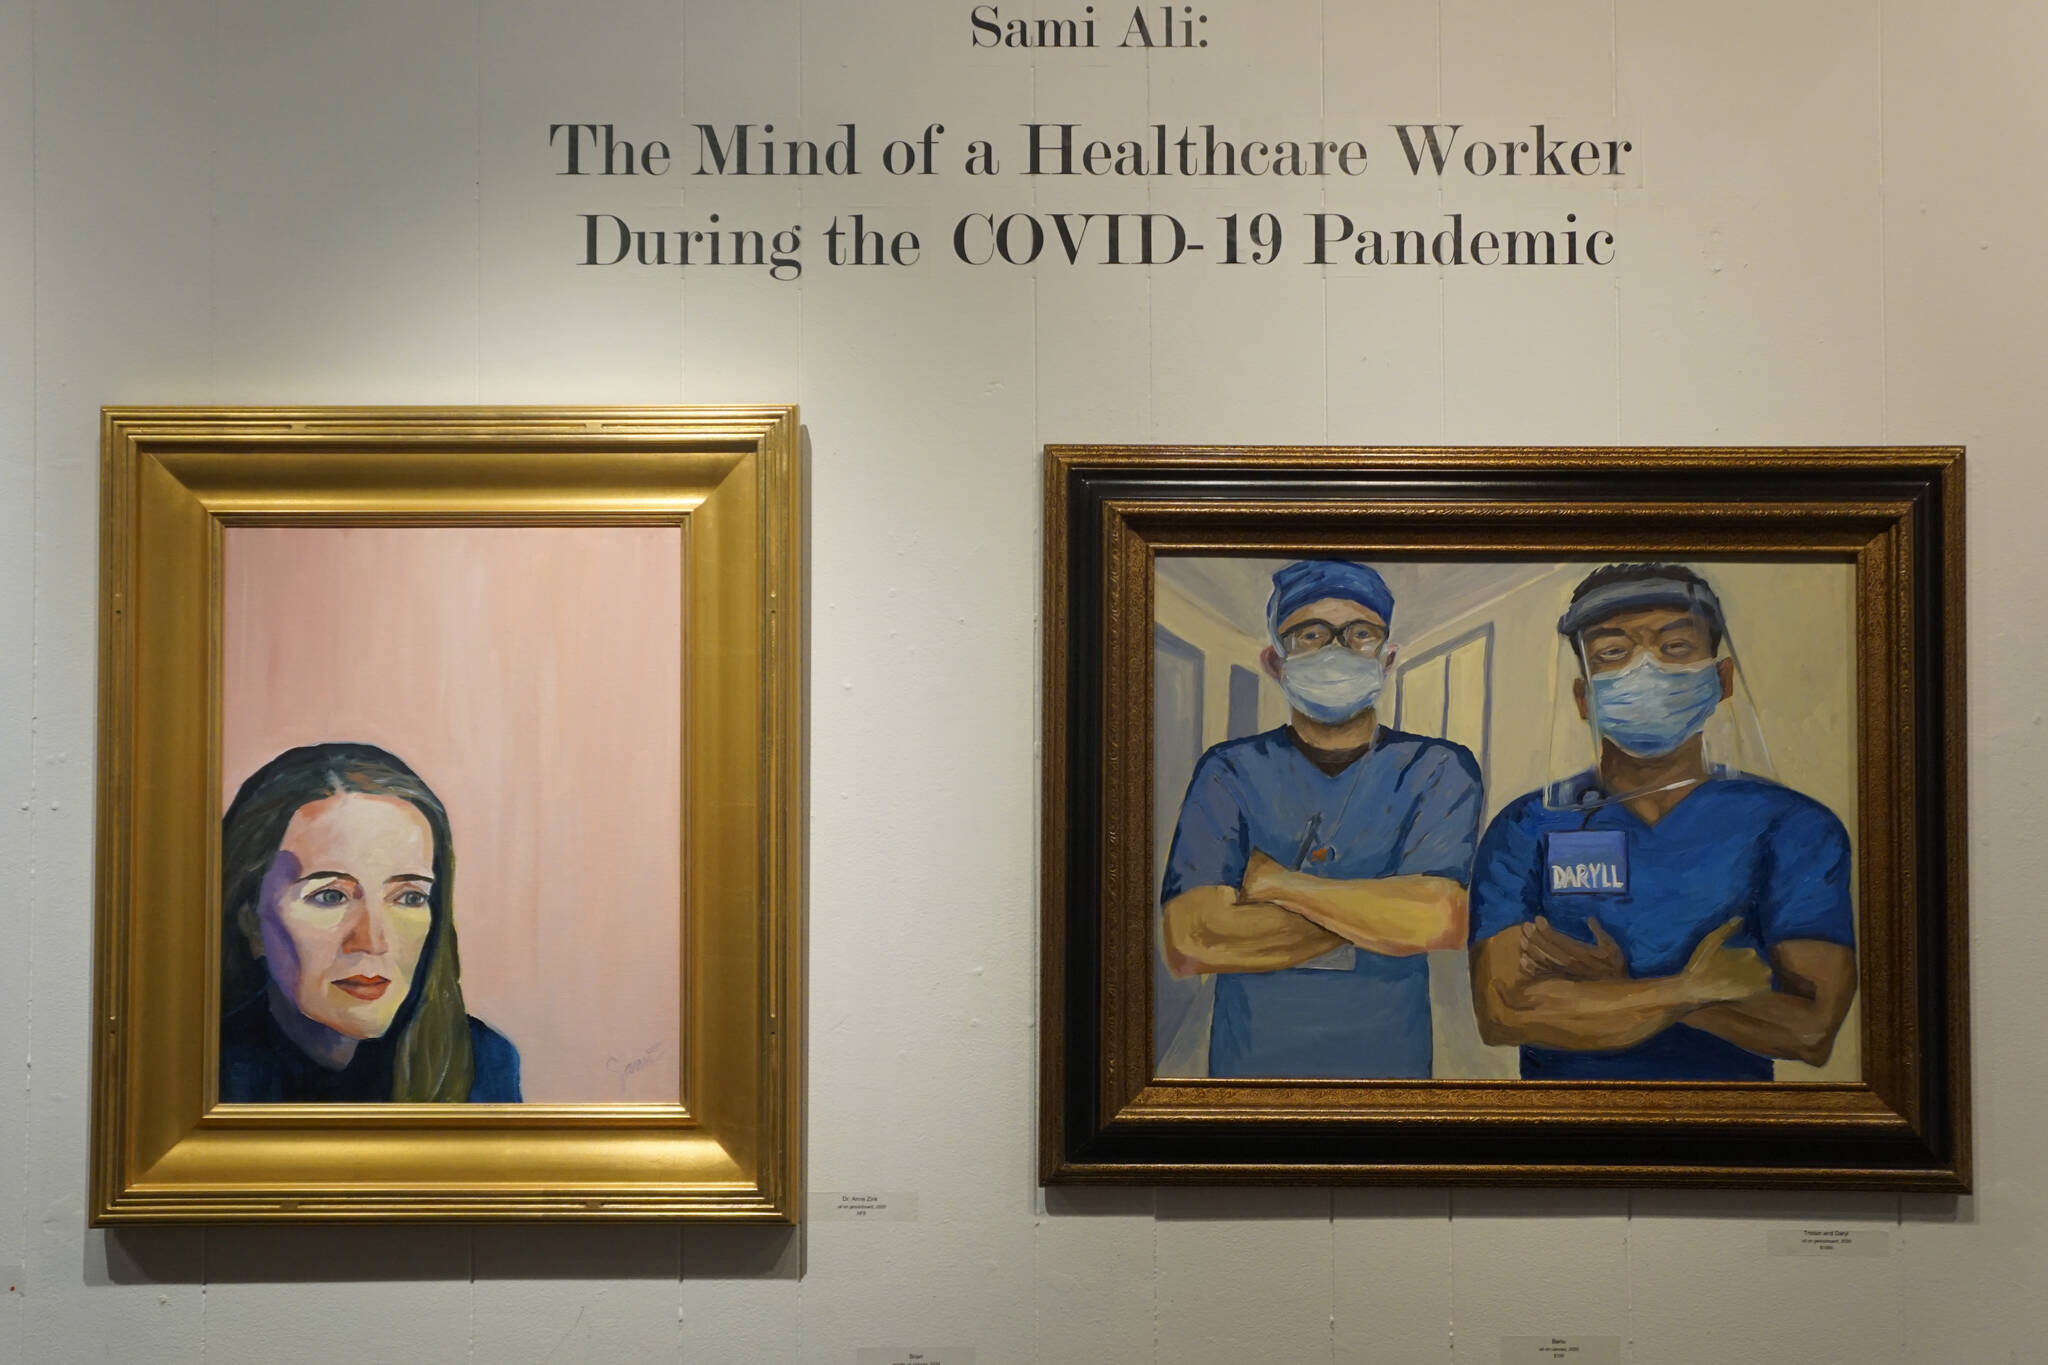 Two paintings in in Dr. Sami Ali’s exhibit, “The Mind of a Healthcare Worker During the COVID-19 Pandemic,” showing in January 2022 at the Homer Council on the Arts in Homer, Alaska. (Photo by Michael Armstrong/Homer News)